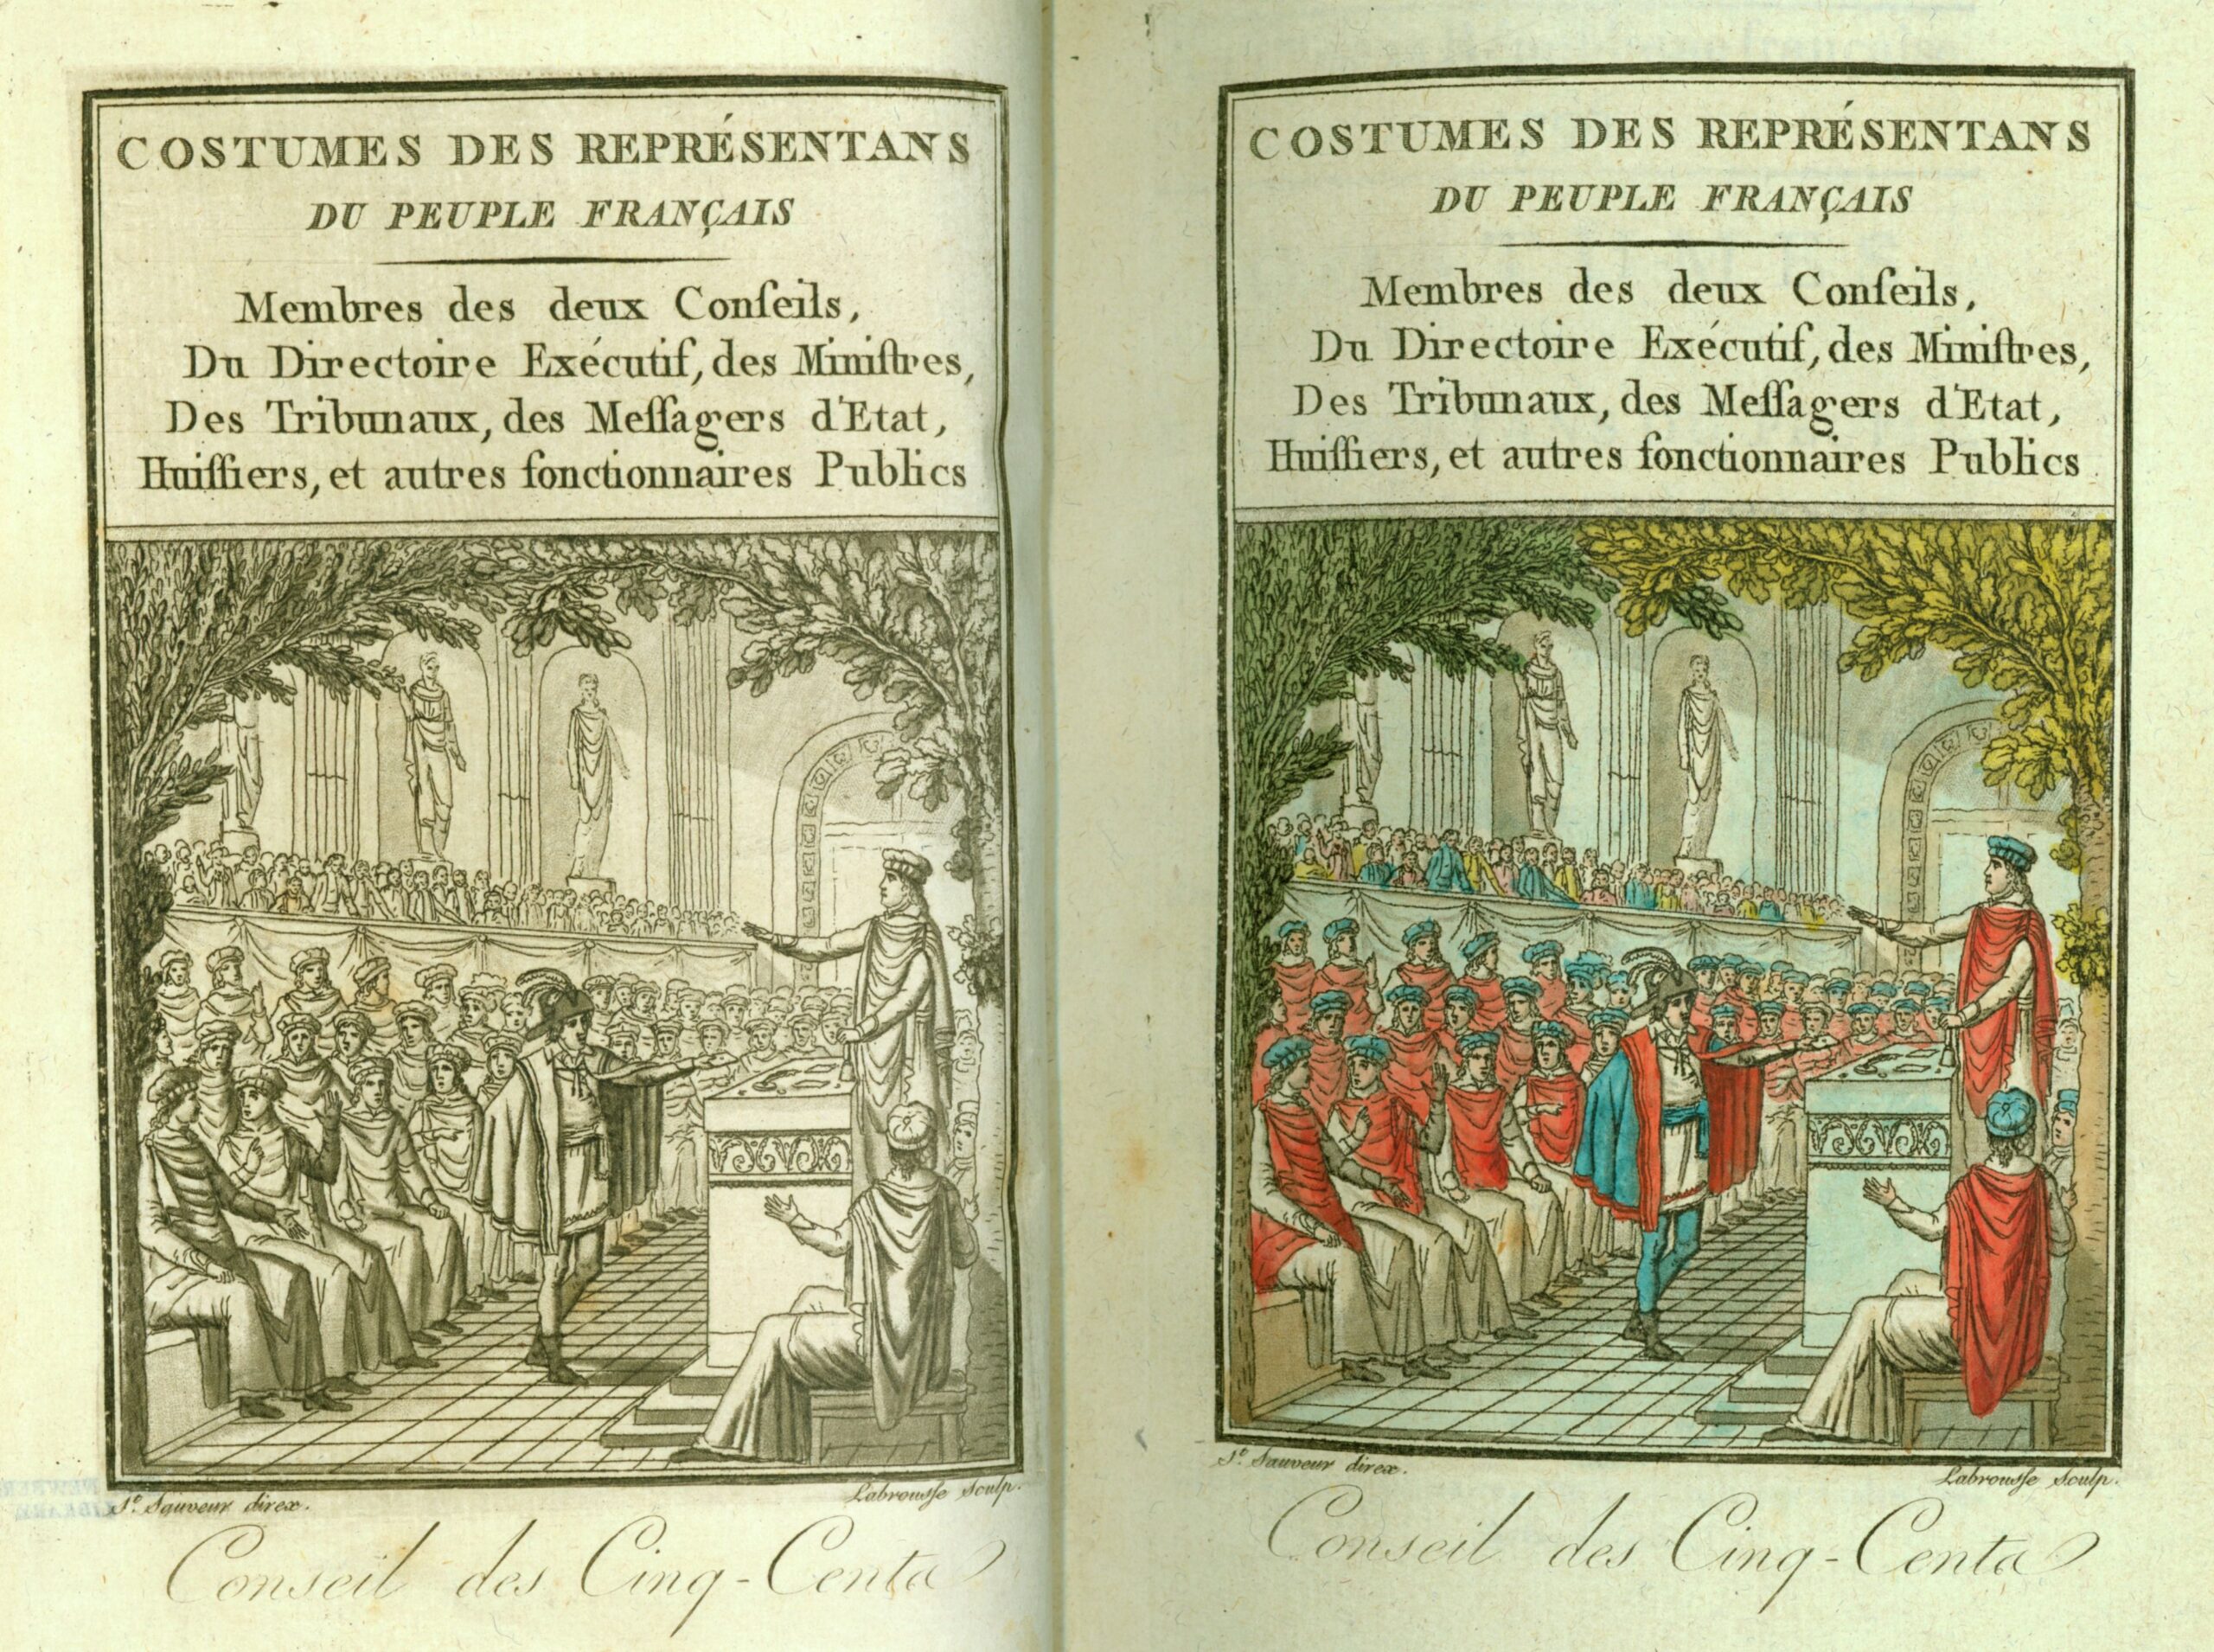 Two-page spread showing the same image on each page. On the left in black and white and on the right in color. The image shows a white man standing at a podium speaking to a large audience of other white men in a room with classical statues and architecture. The men's clothing is also Roman-inspired.